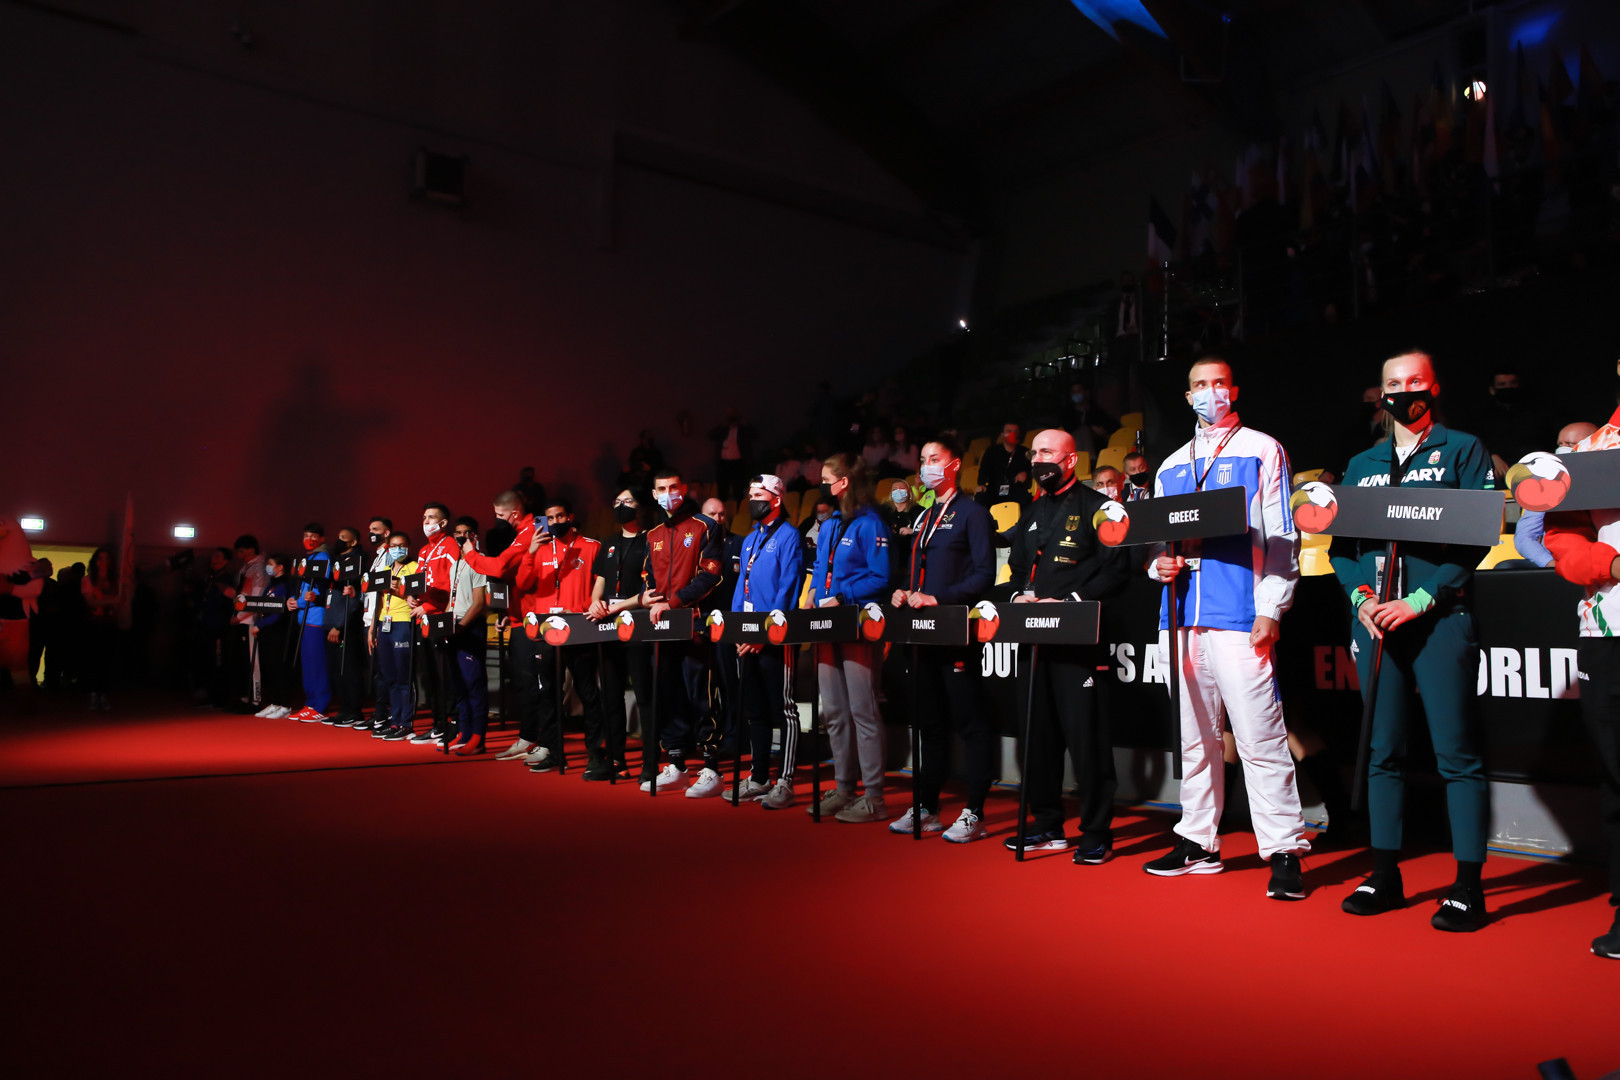 Competitors from 52 countries gather for opening of AIBA Youth World BoxingChampionships 